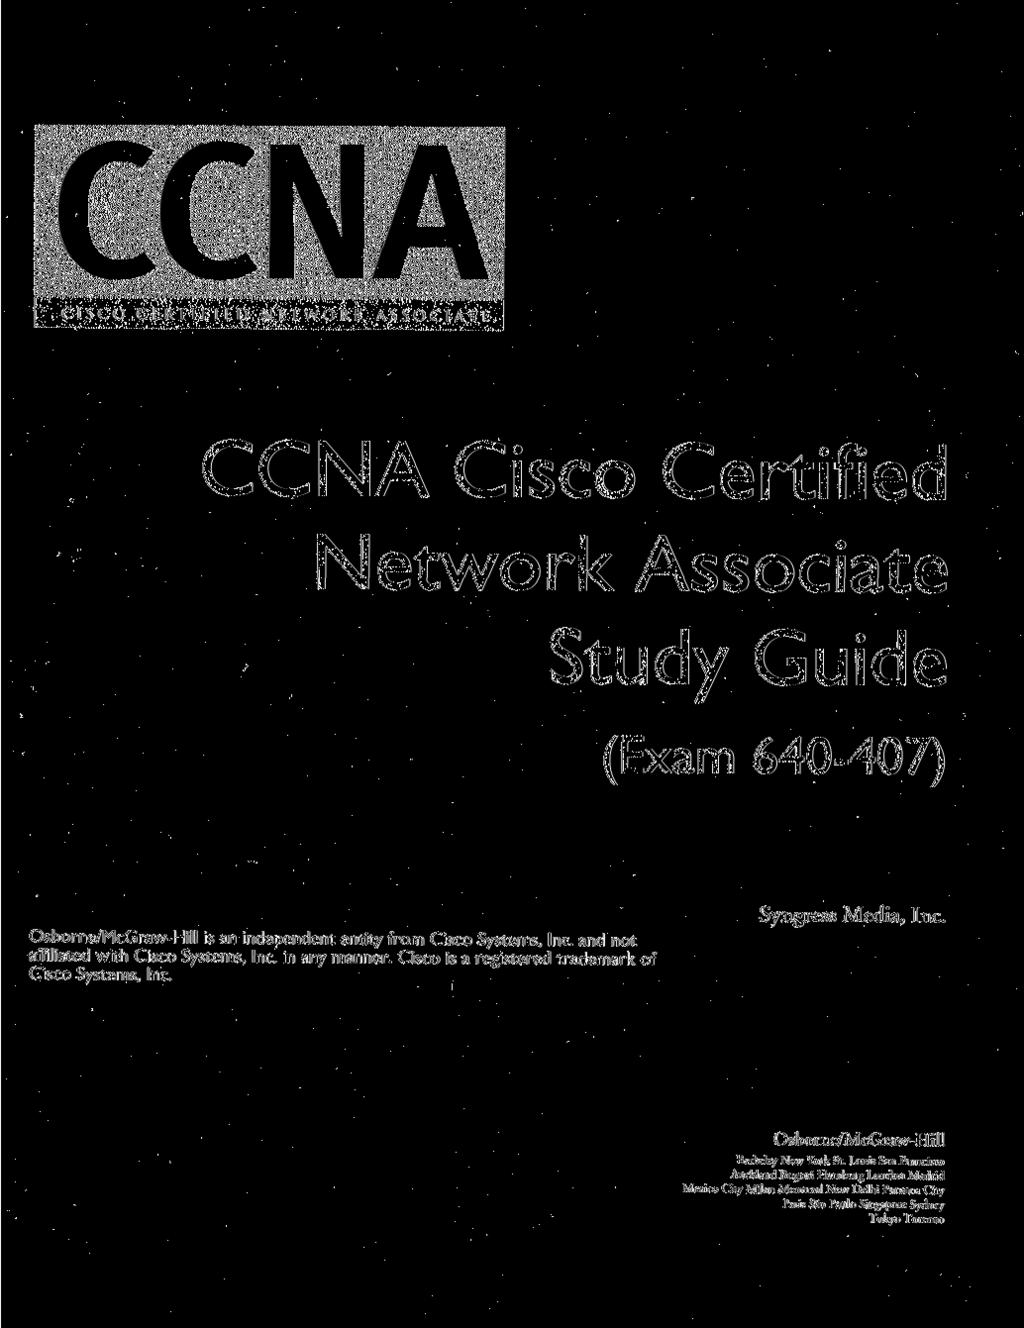 CCNA Cisco Certified Network Associate Study Guide (Exam 640-407) Osborne/McGraw-Hill is an independent entity from Cisco Systems, Inc. and not affiliated with Cisco Systems, Inc. in any manner.